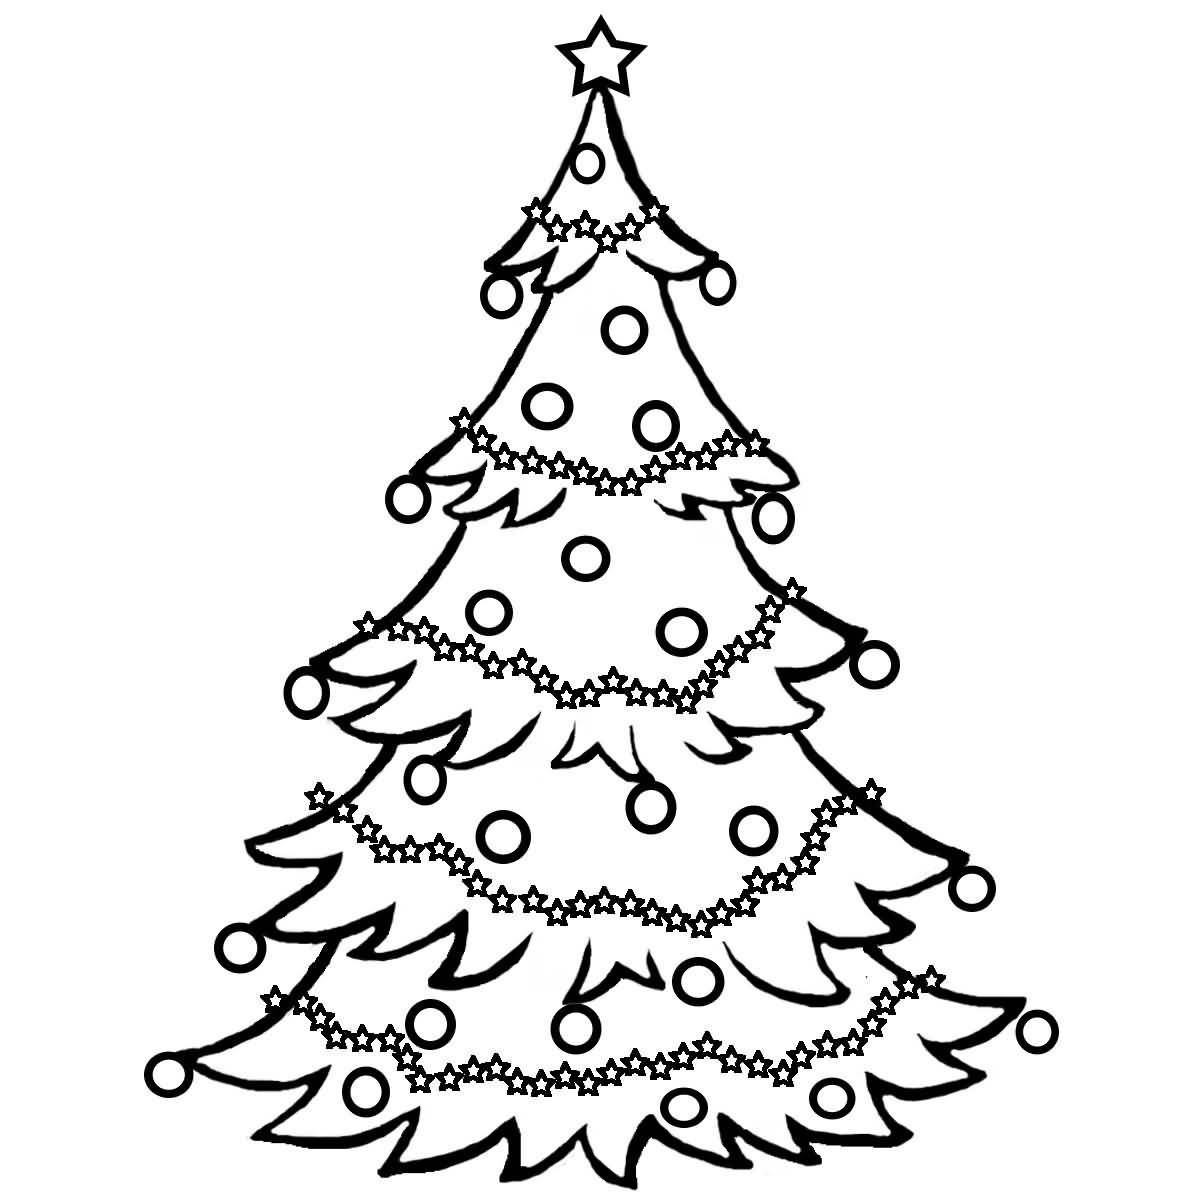 Christmas Tree Coloring Pages Image Picture Photo Wallpaper 17